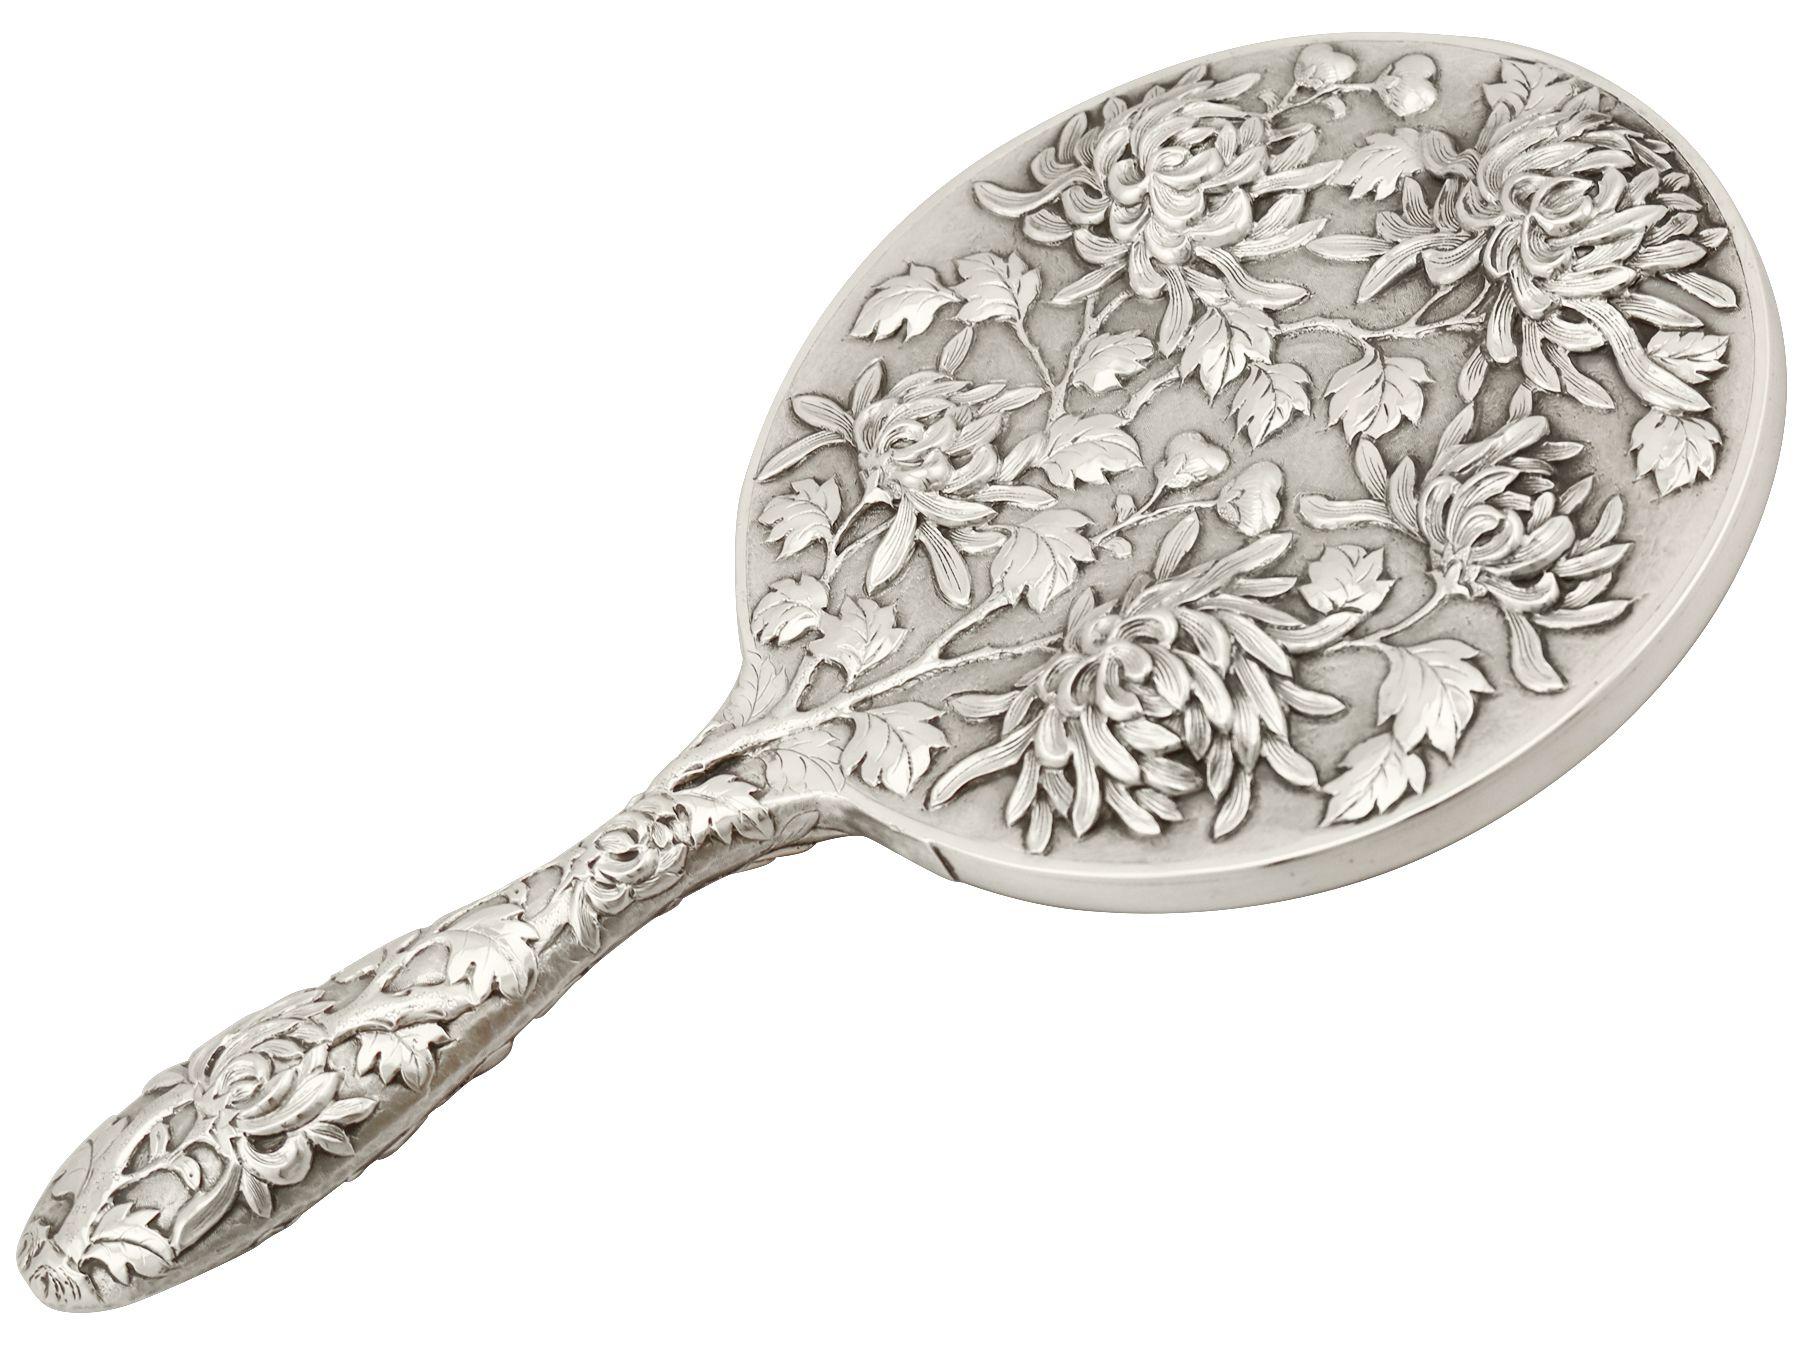 An exceptional, fine and impressive antique Chinese export silver dressing table hand mirror; an addition to our ornamental bedroom silverware collection

This exceptional antique Chinese export silver (CES) hand mirror has a circular form with a